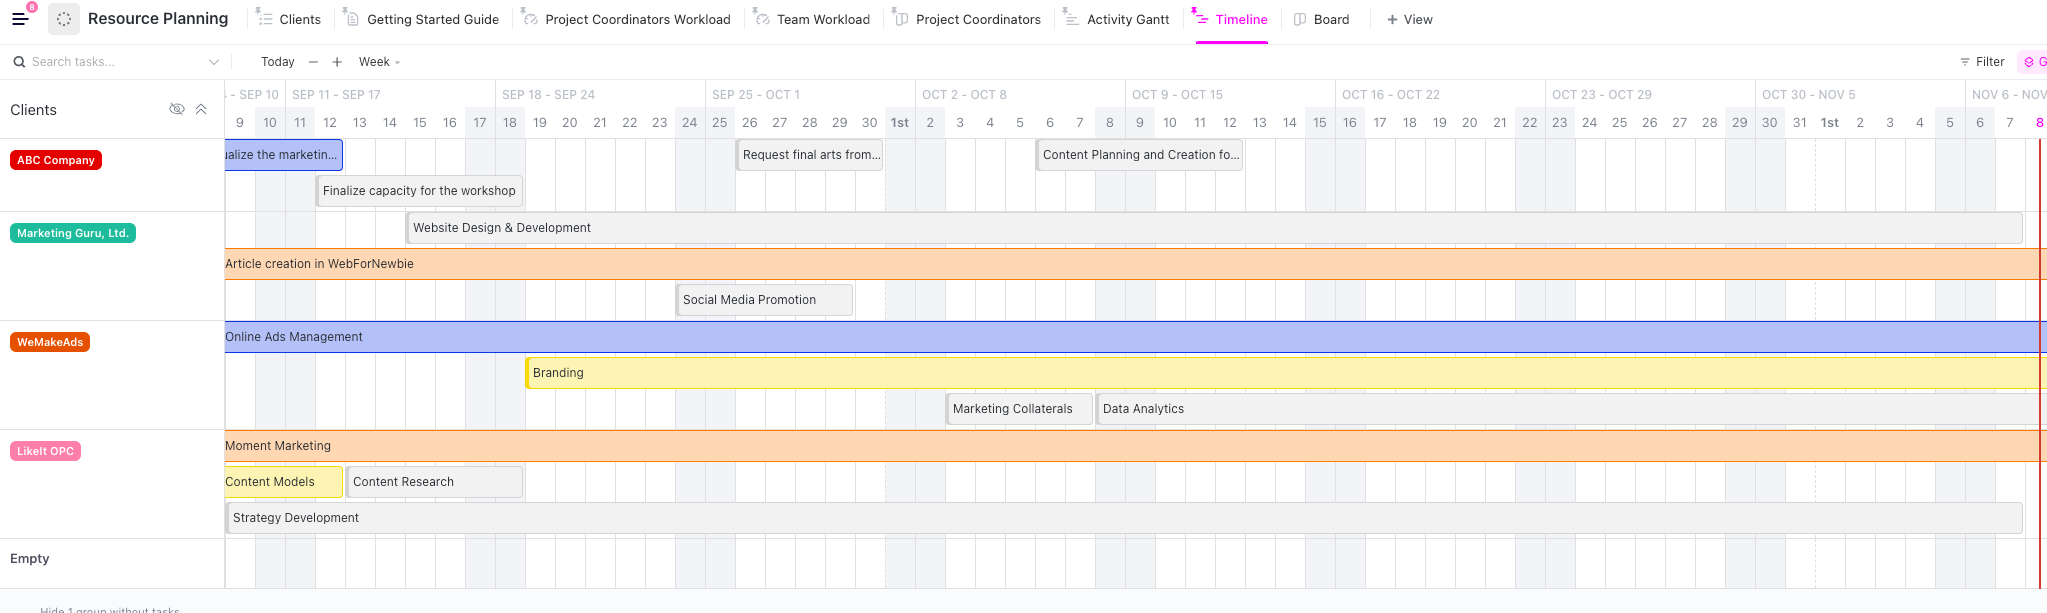 ClickUp Resource Planning Template